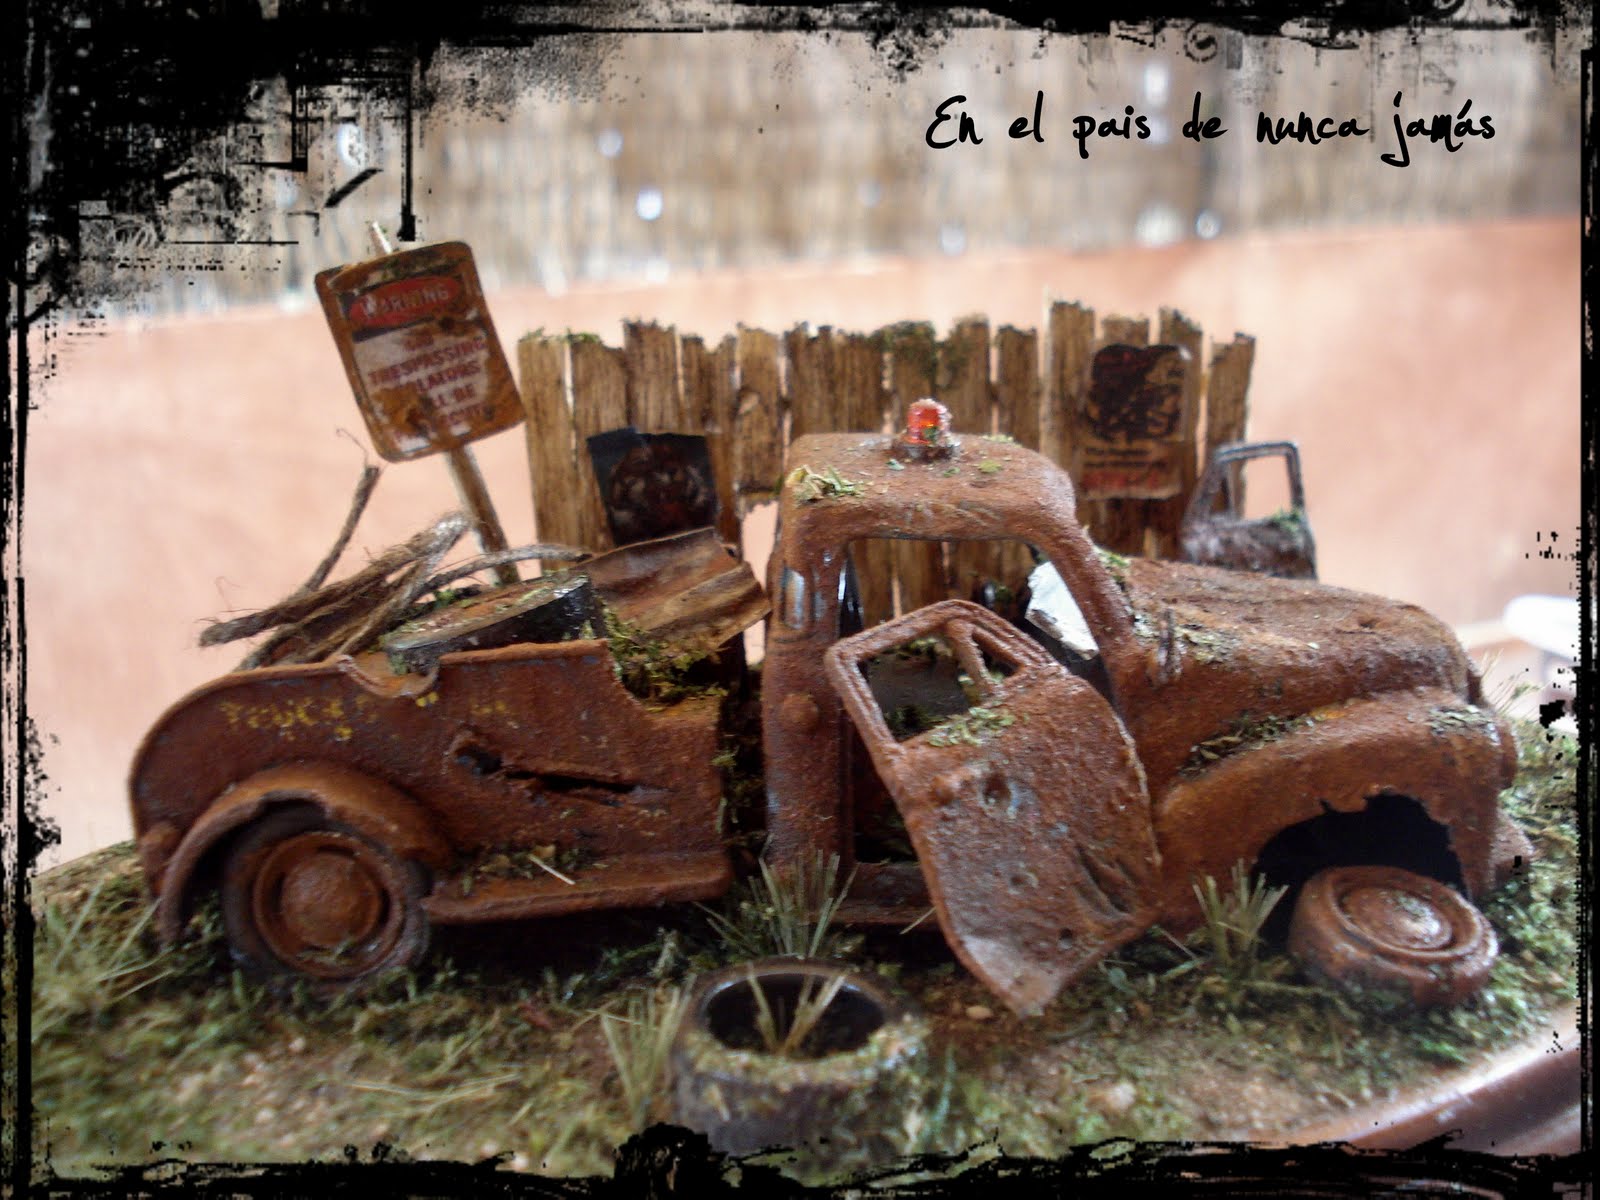 Just A Car Guy miniature model diorama from May, in Madrid.. pic